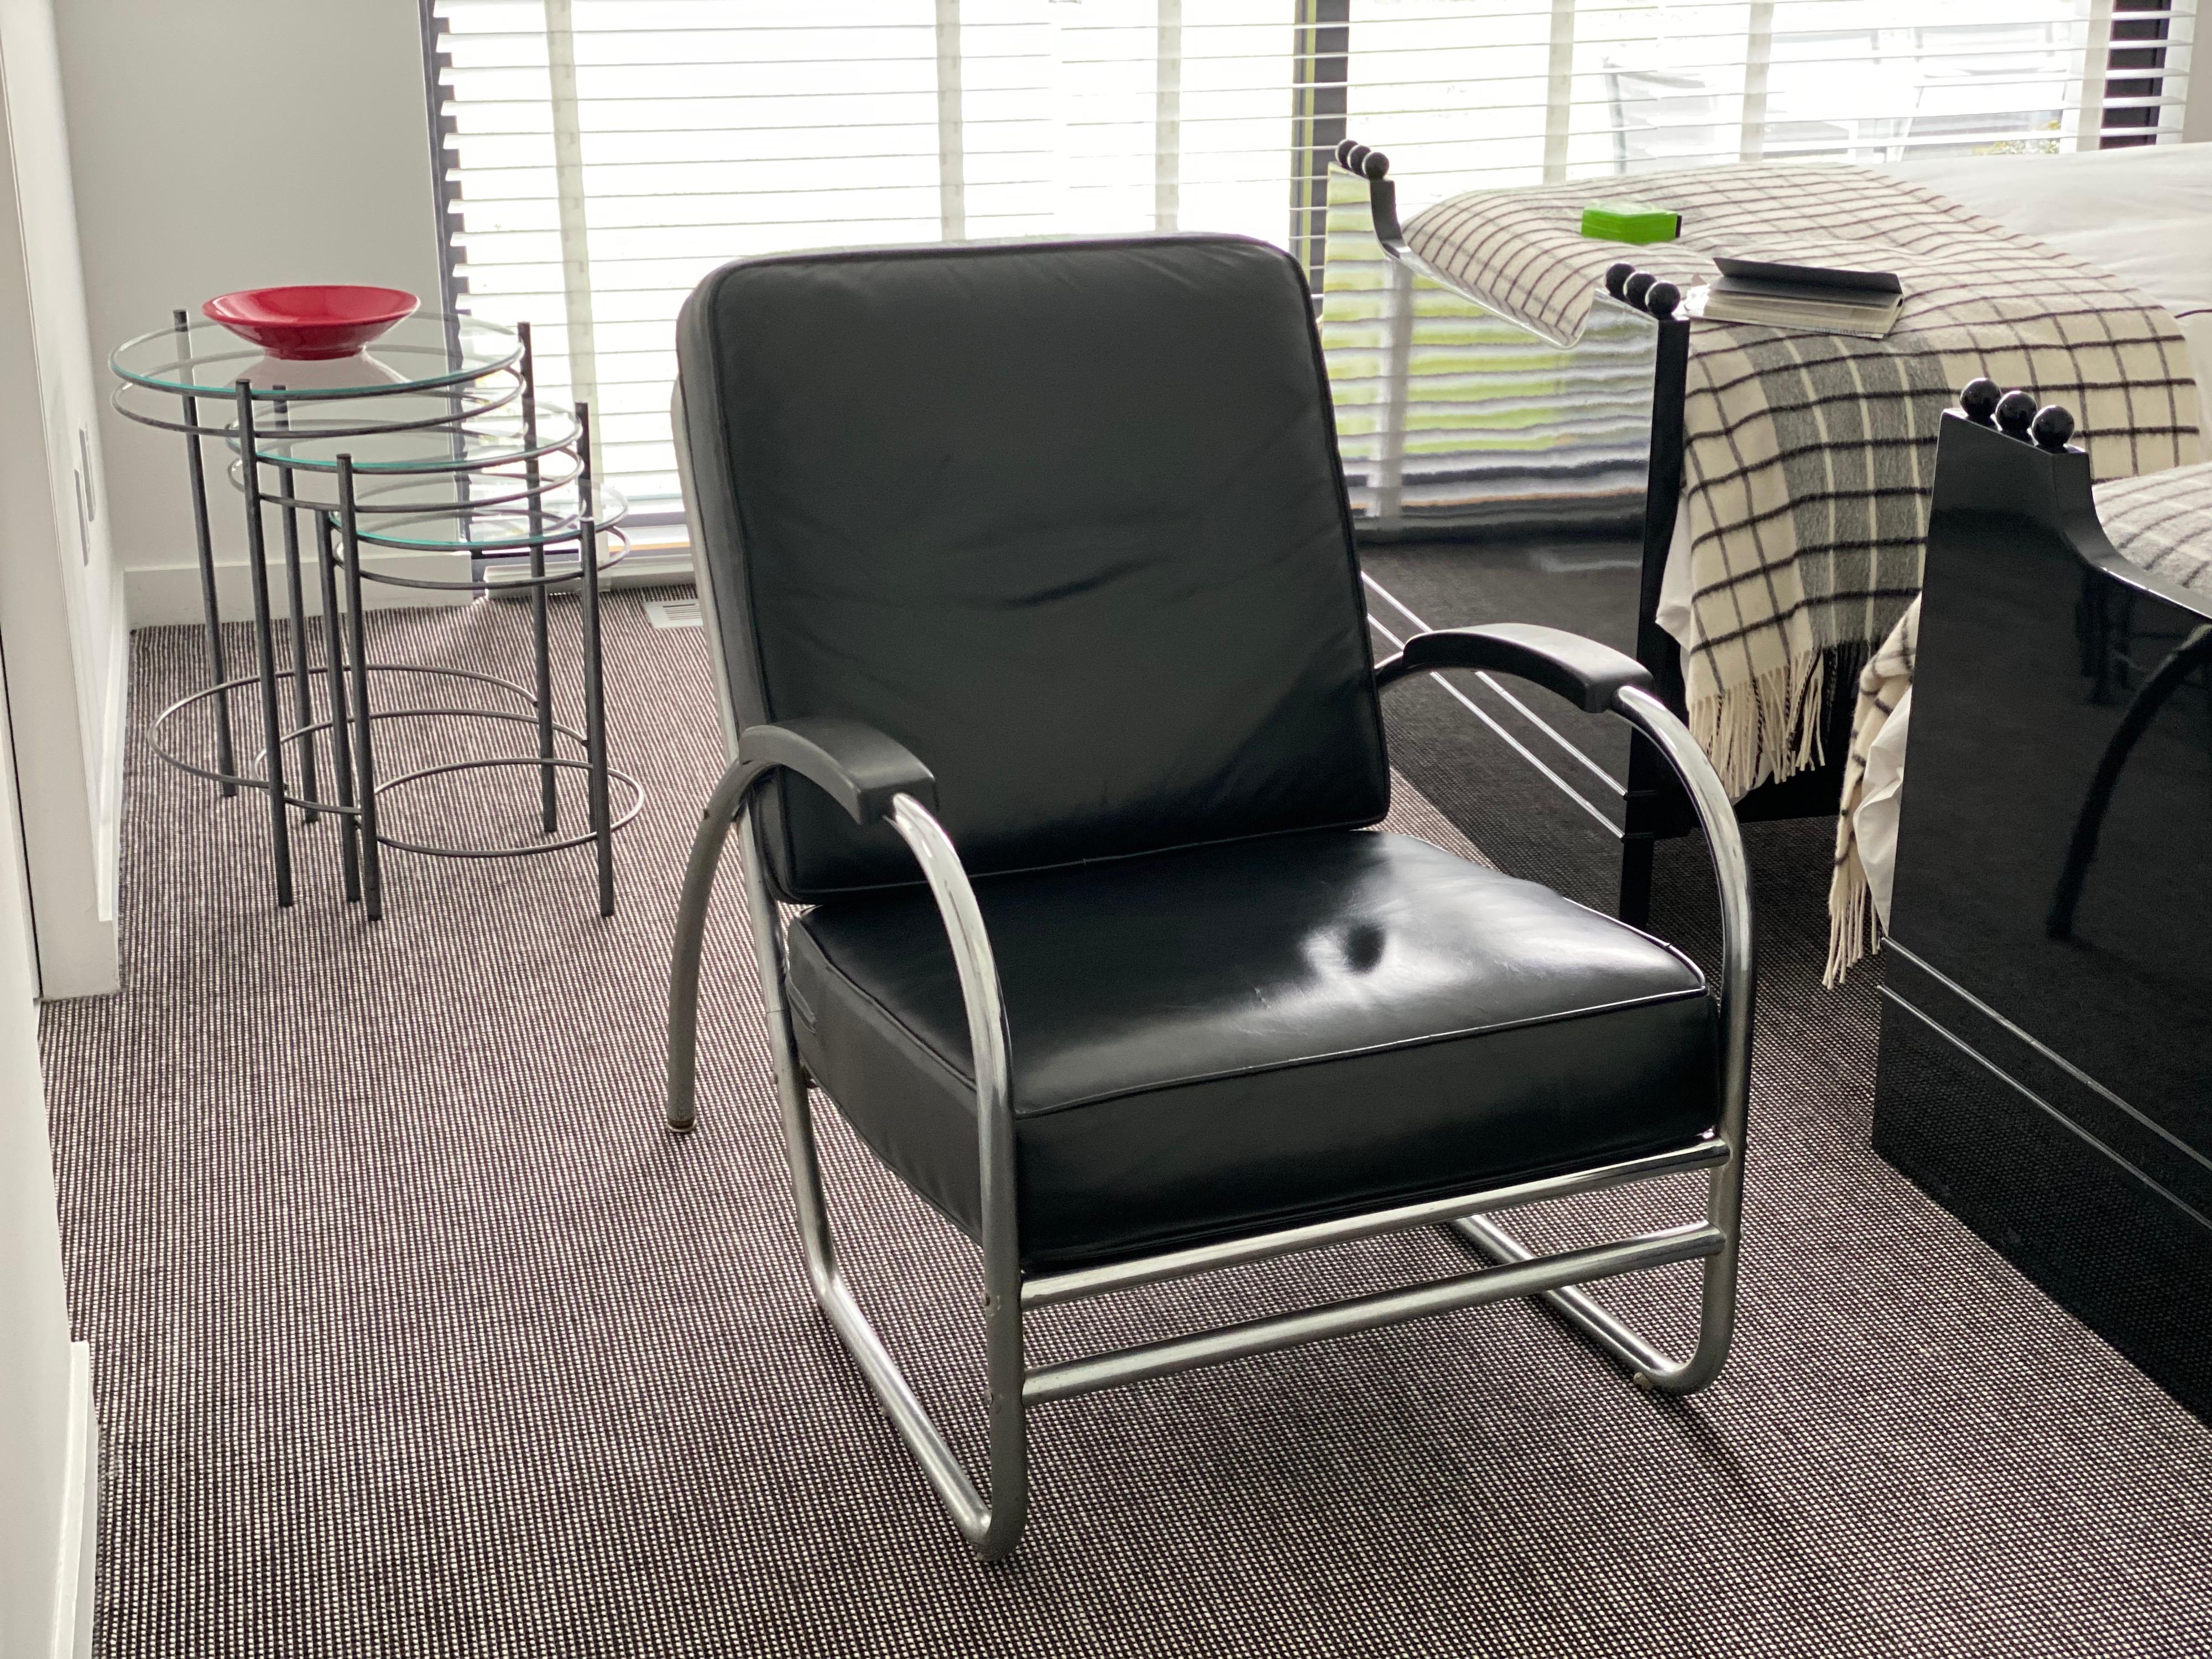 Staineless steel & black leather lounge chair by Royal Metal Manufacturing Co.
The most prominent parts of the chair appear to be made of tubular stainless steel, whilst the seat and back rail appear to be a different darker metal with slight